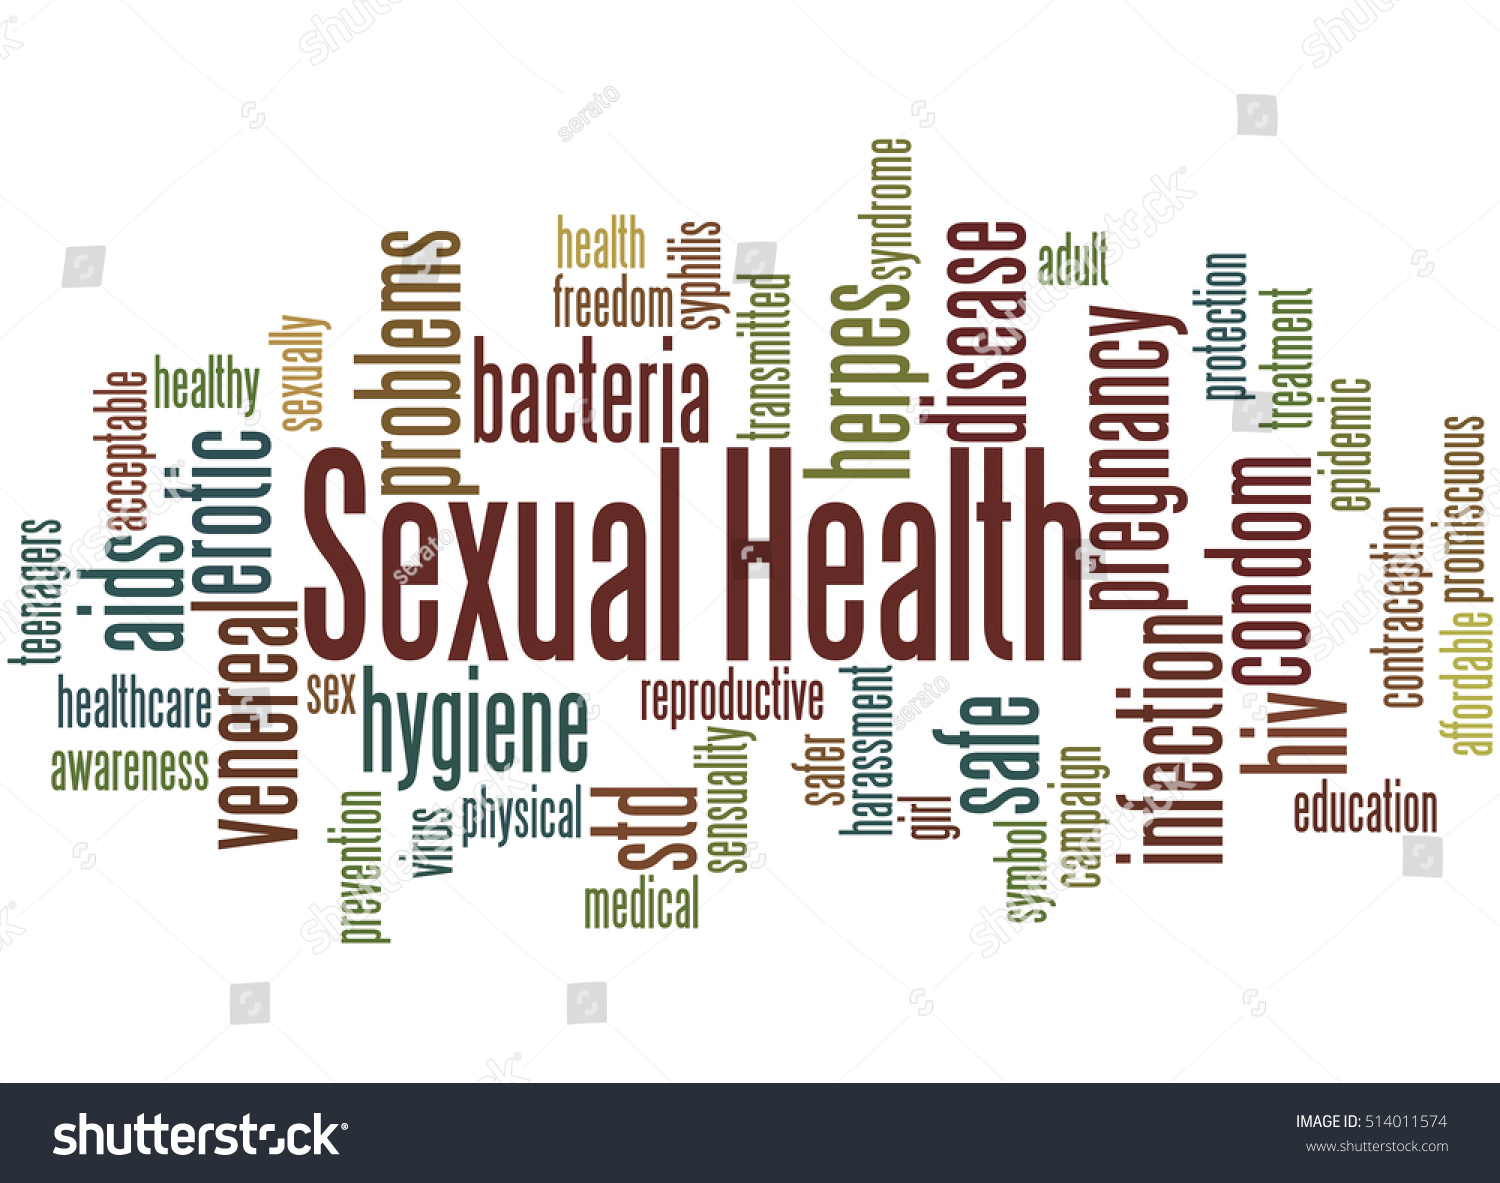 Sexual Health Word Cloud Concept On Stock Illustration 514011574 Shutterstock 7417